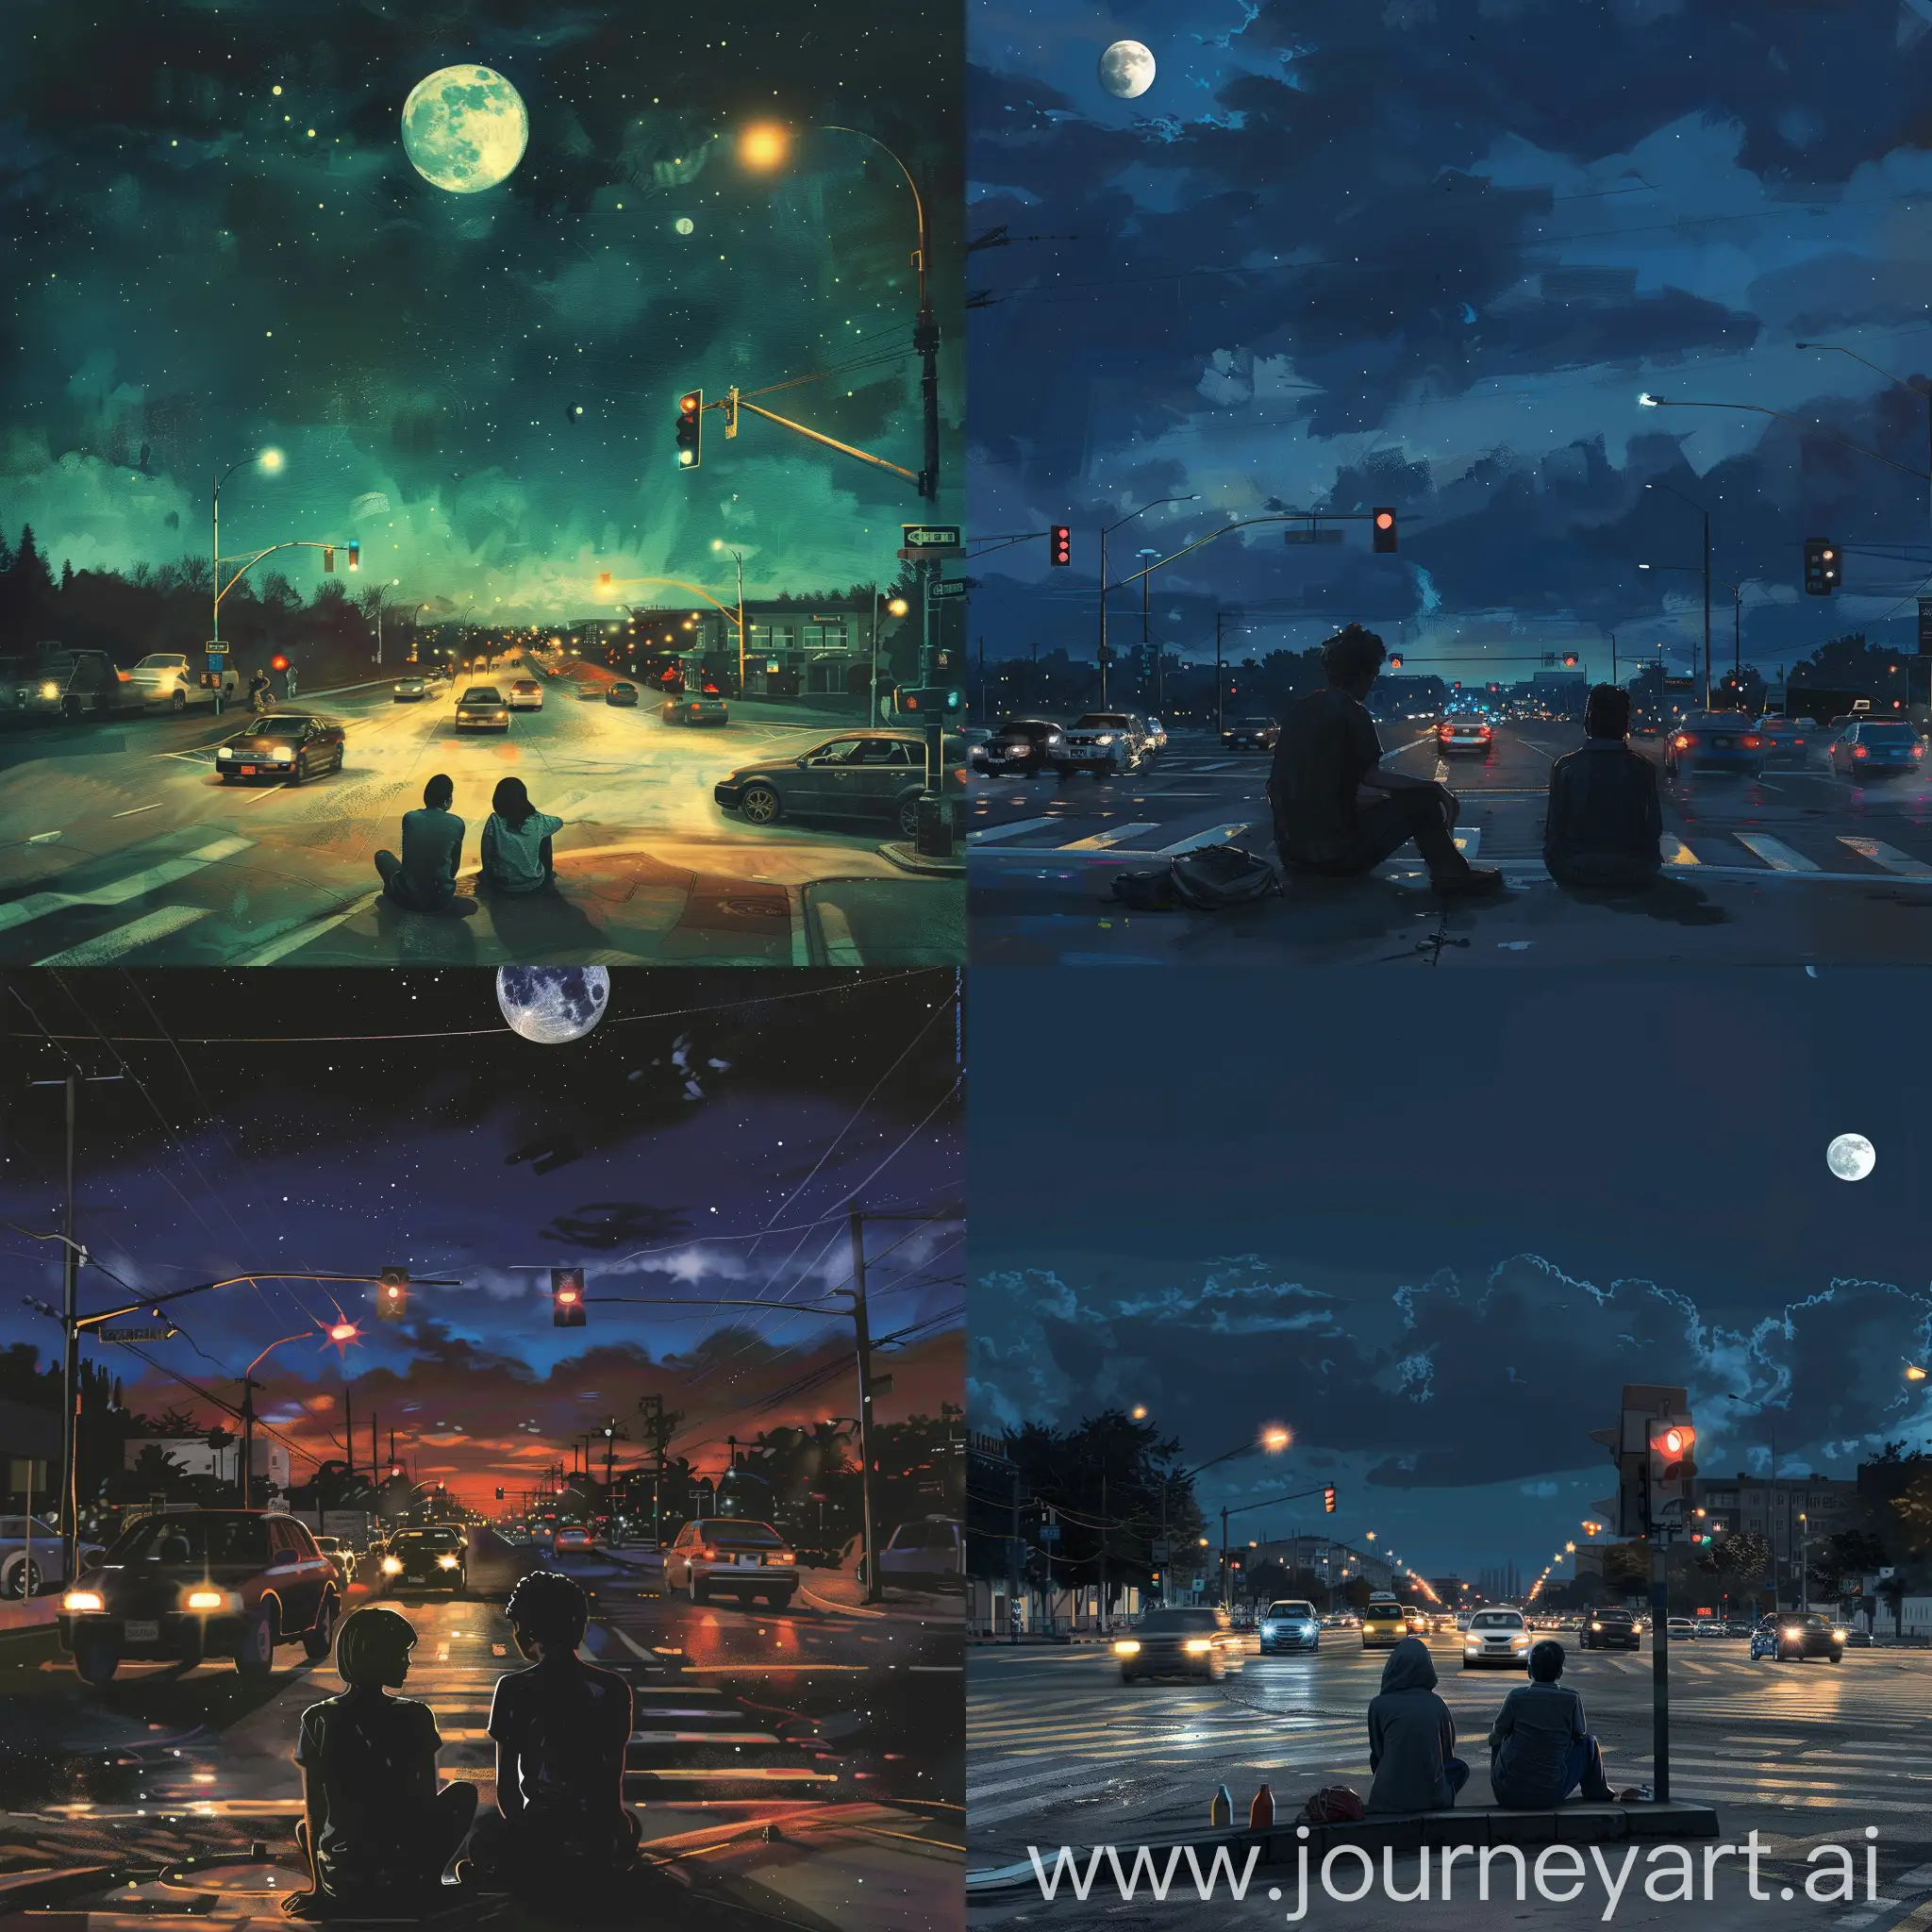 book cover, two figures sat at an intersection at night time, cars driving around them and the moon in the sky